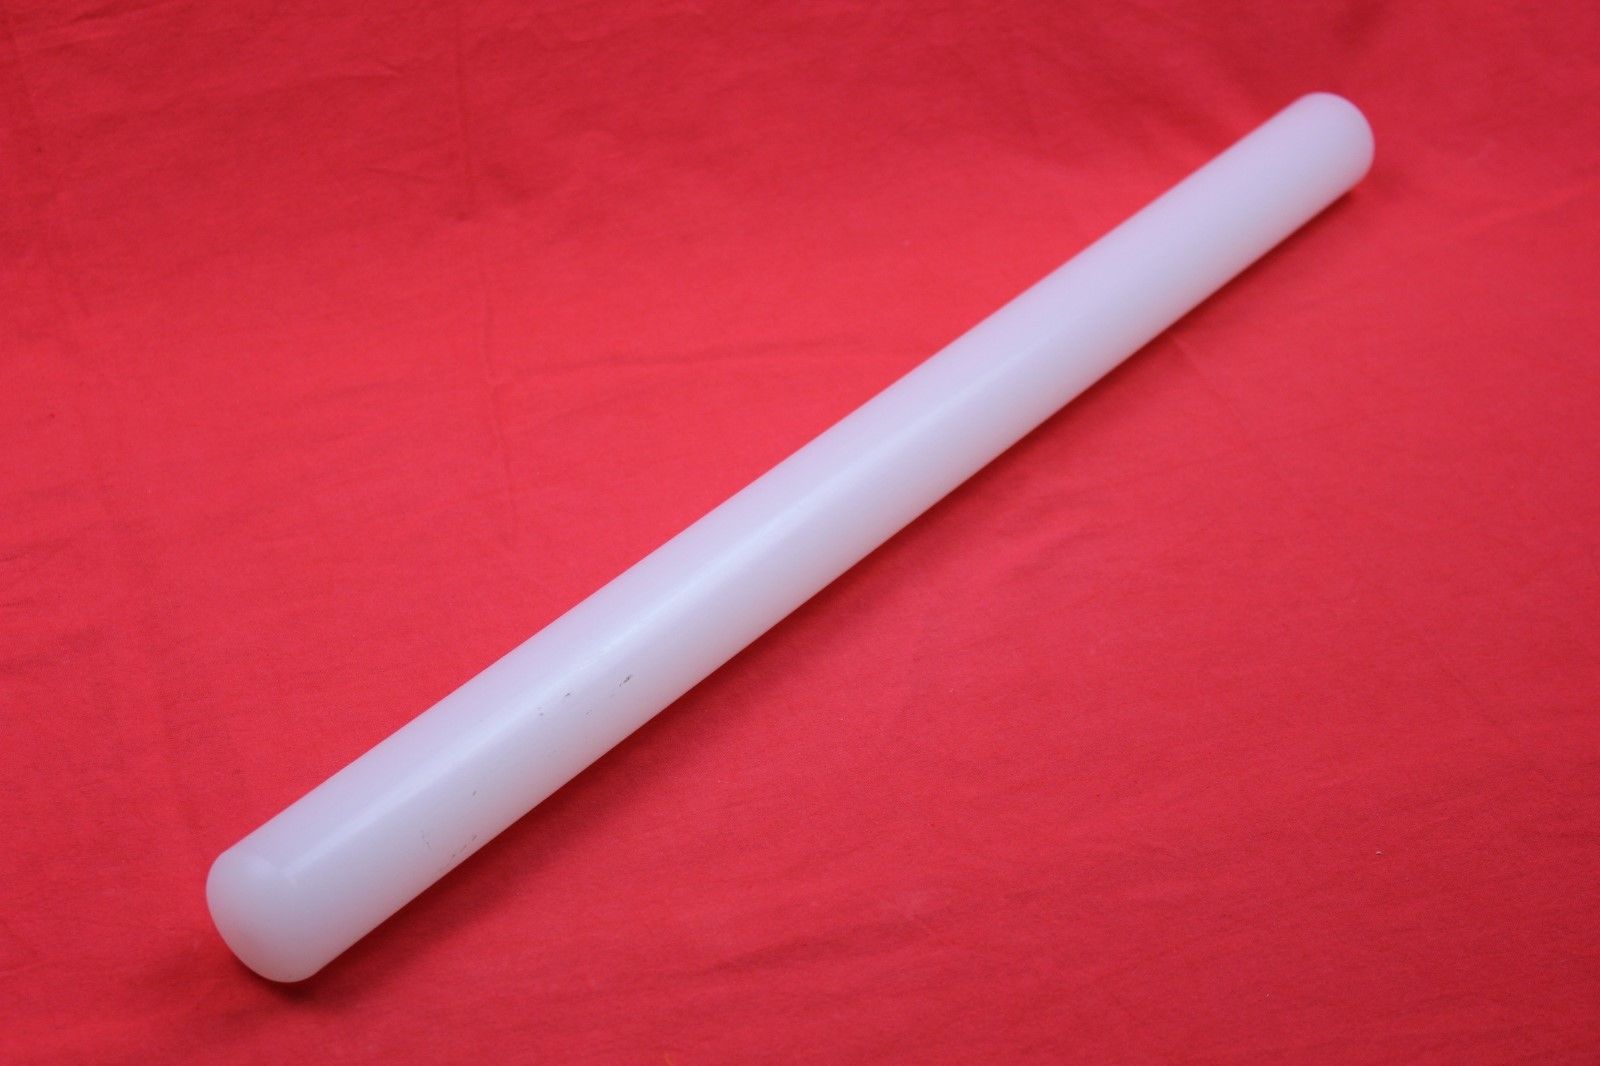 attachment-https://www.cupcakeaddicts.co.uk/wp-content/uploads/imported/7/Variation-of-Plastic-Rolling-Pin-8-Various-sizes-Cake-Pastry-UK-SELLER-Same-day-dispatch-323097813287-a52d.jpg